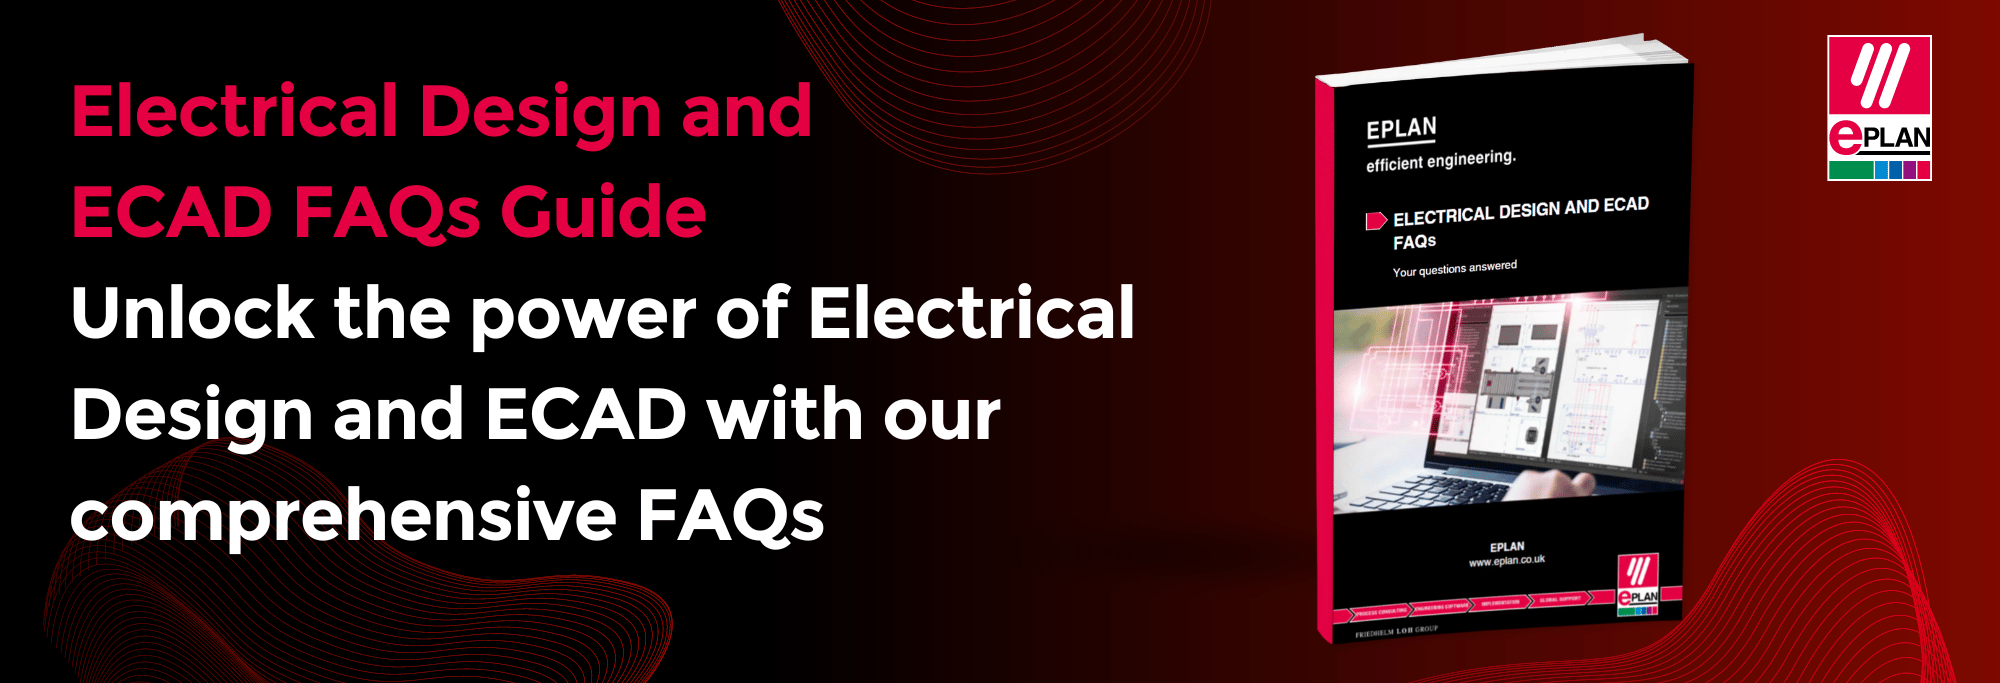 Electrical Design and ECAD FAQs Landing Page Banner